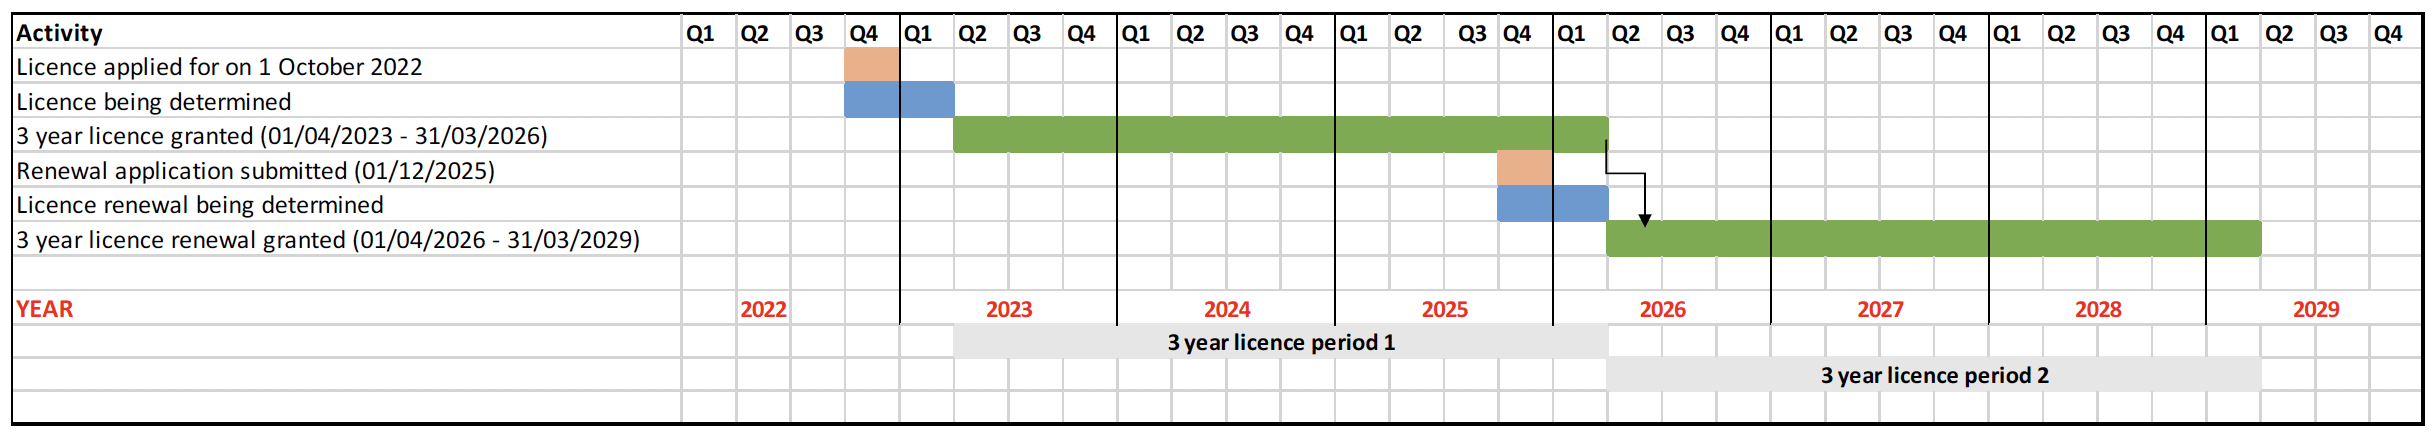 Gantt chart illustrating the process for renewing a licence where the application for renewal is made in advance of the original licence expiring and the application for renewal is also determined before the original licence has expired.